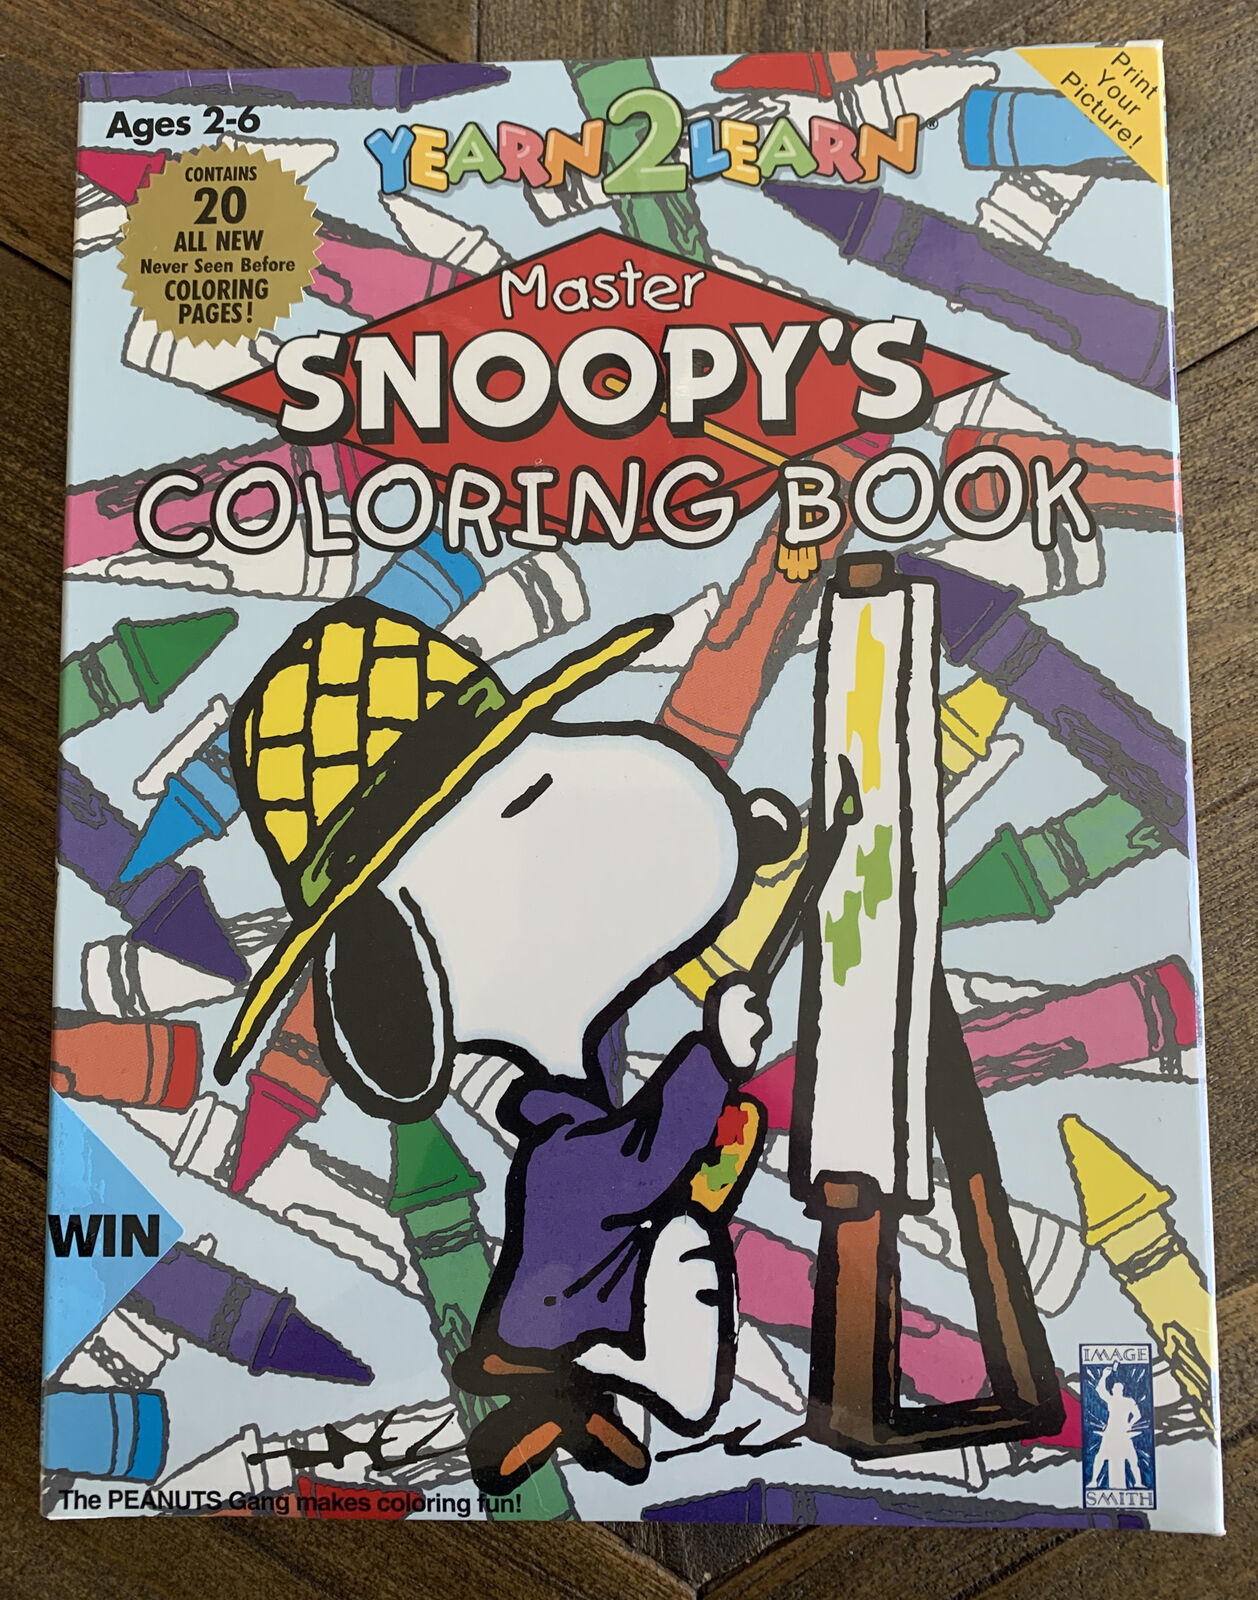 PEANUTS Snoopy Yearn 2 Learn Master Snoopy's Coloring Book Rare NEW SEALED